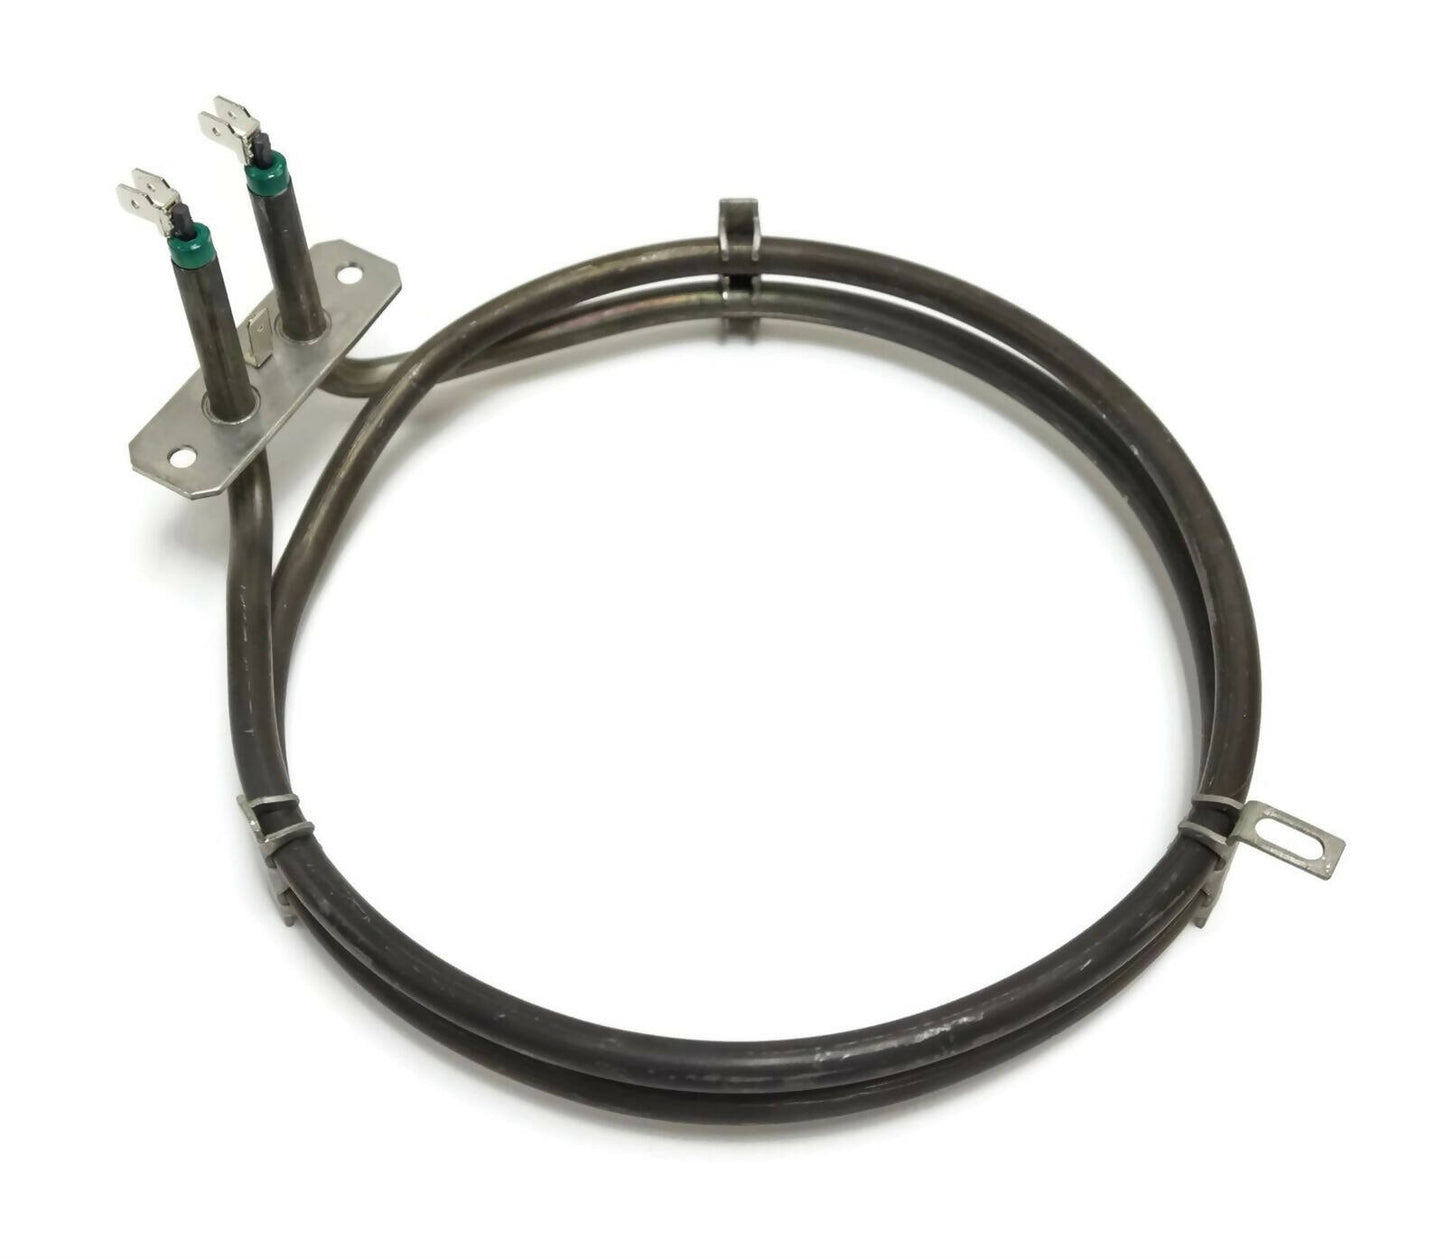 Convection Heating Element - 00241778, Replaces: PD00038675 00239400 239400 241778 830007 OEM PARTS WORLD